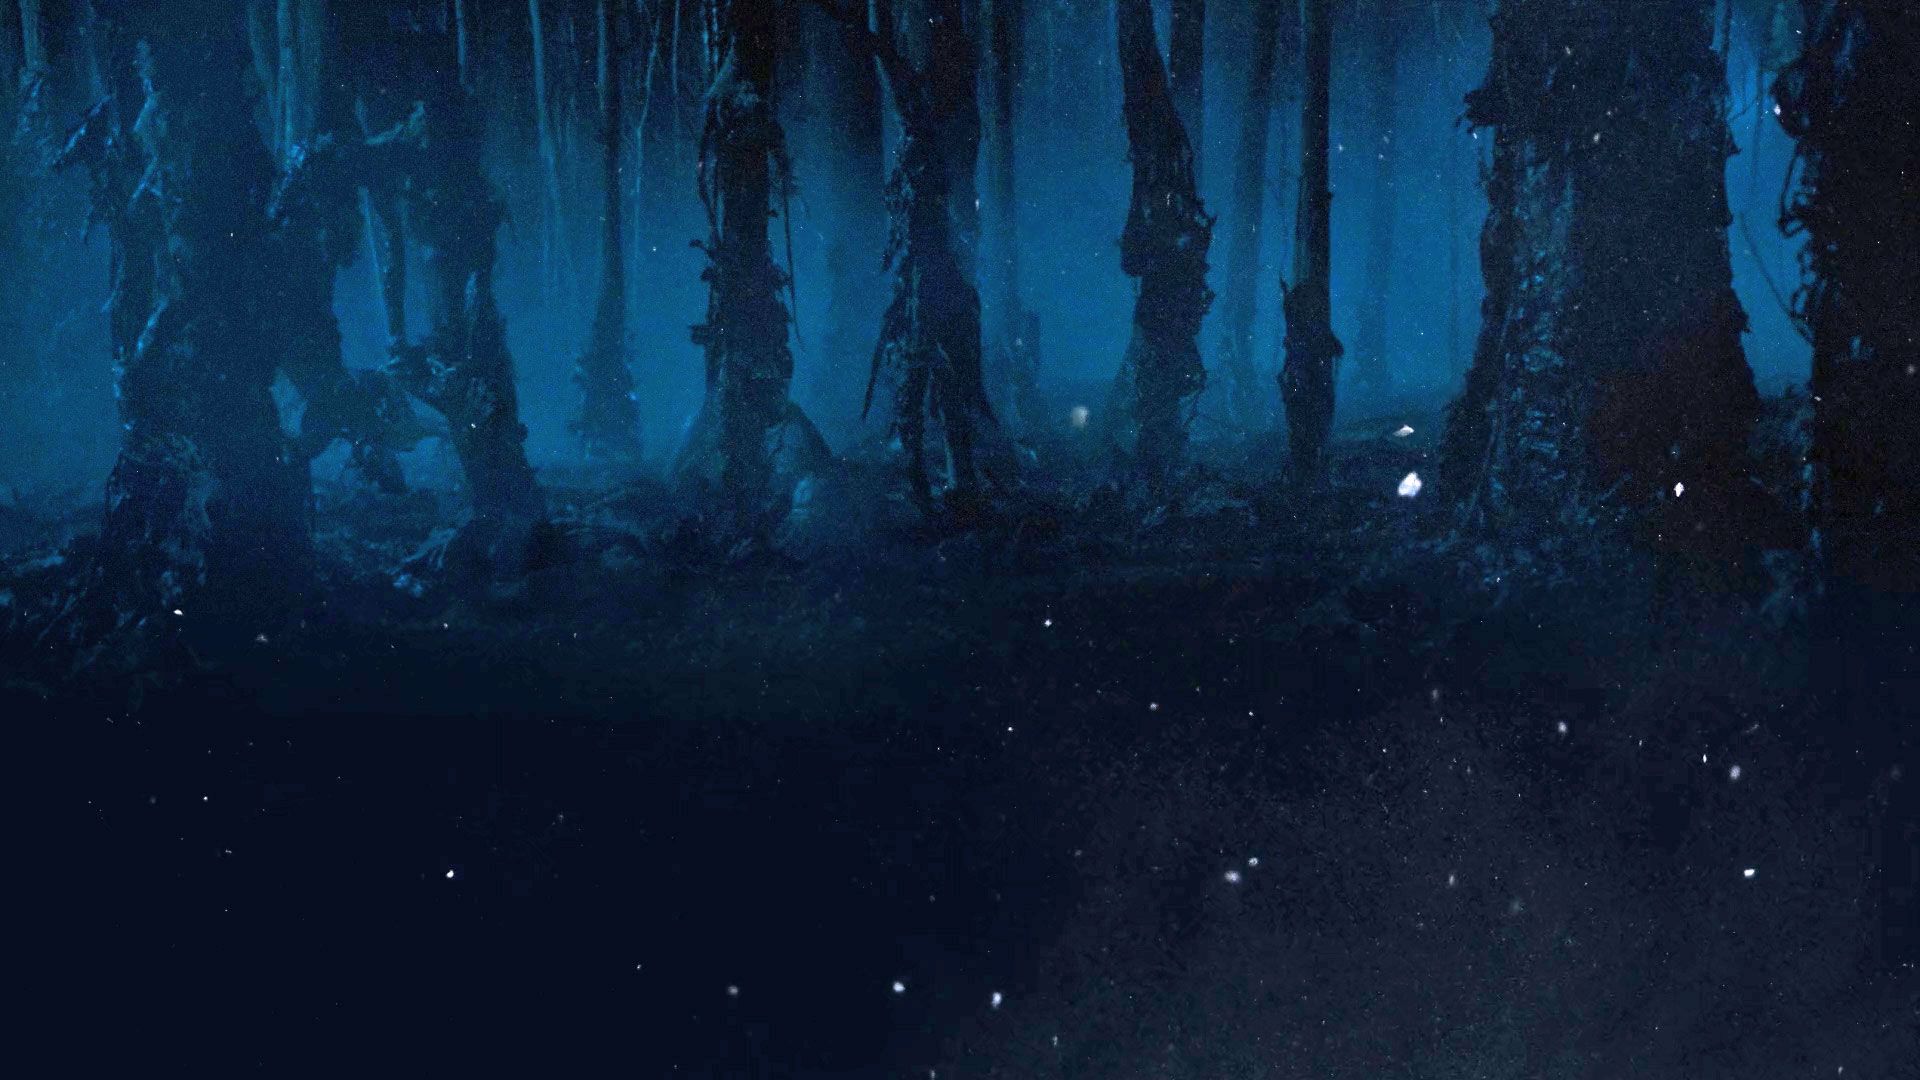 Dystopic Forest. Stranger things upside down, Stranger things wallpaper, Stranger things mike